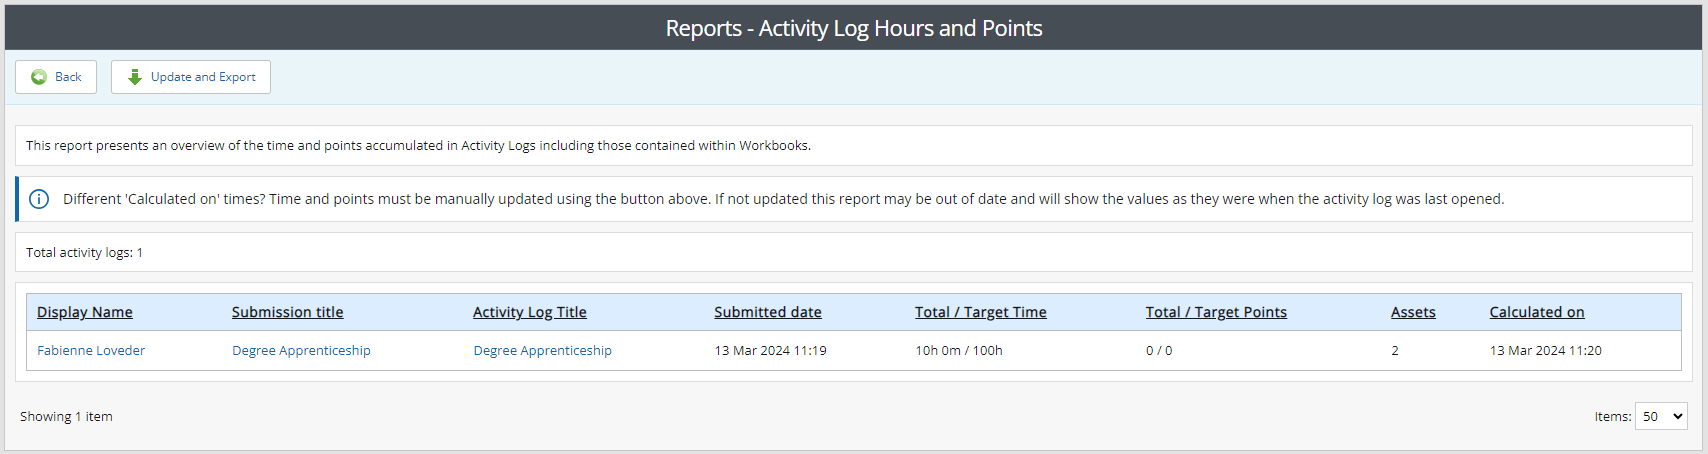 ATLAS Activity Log Hours and Points Report